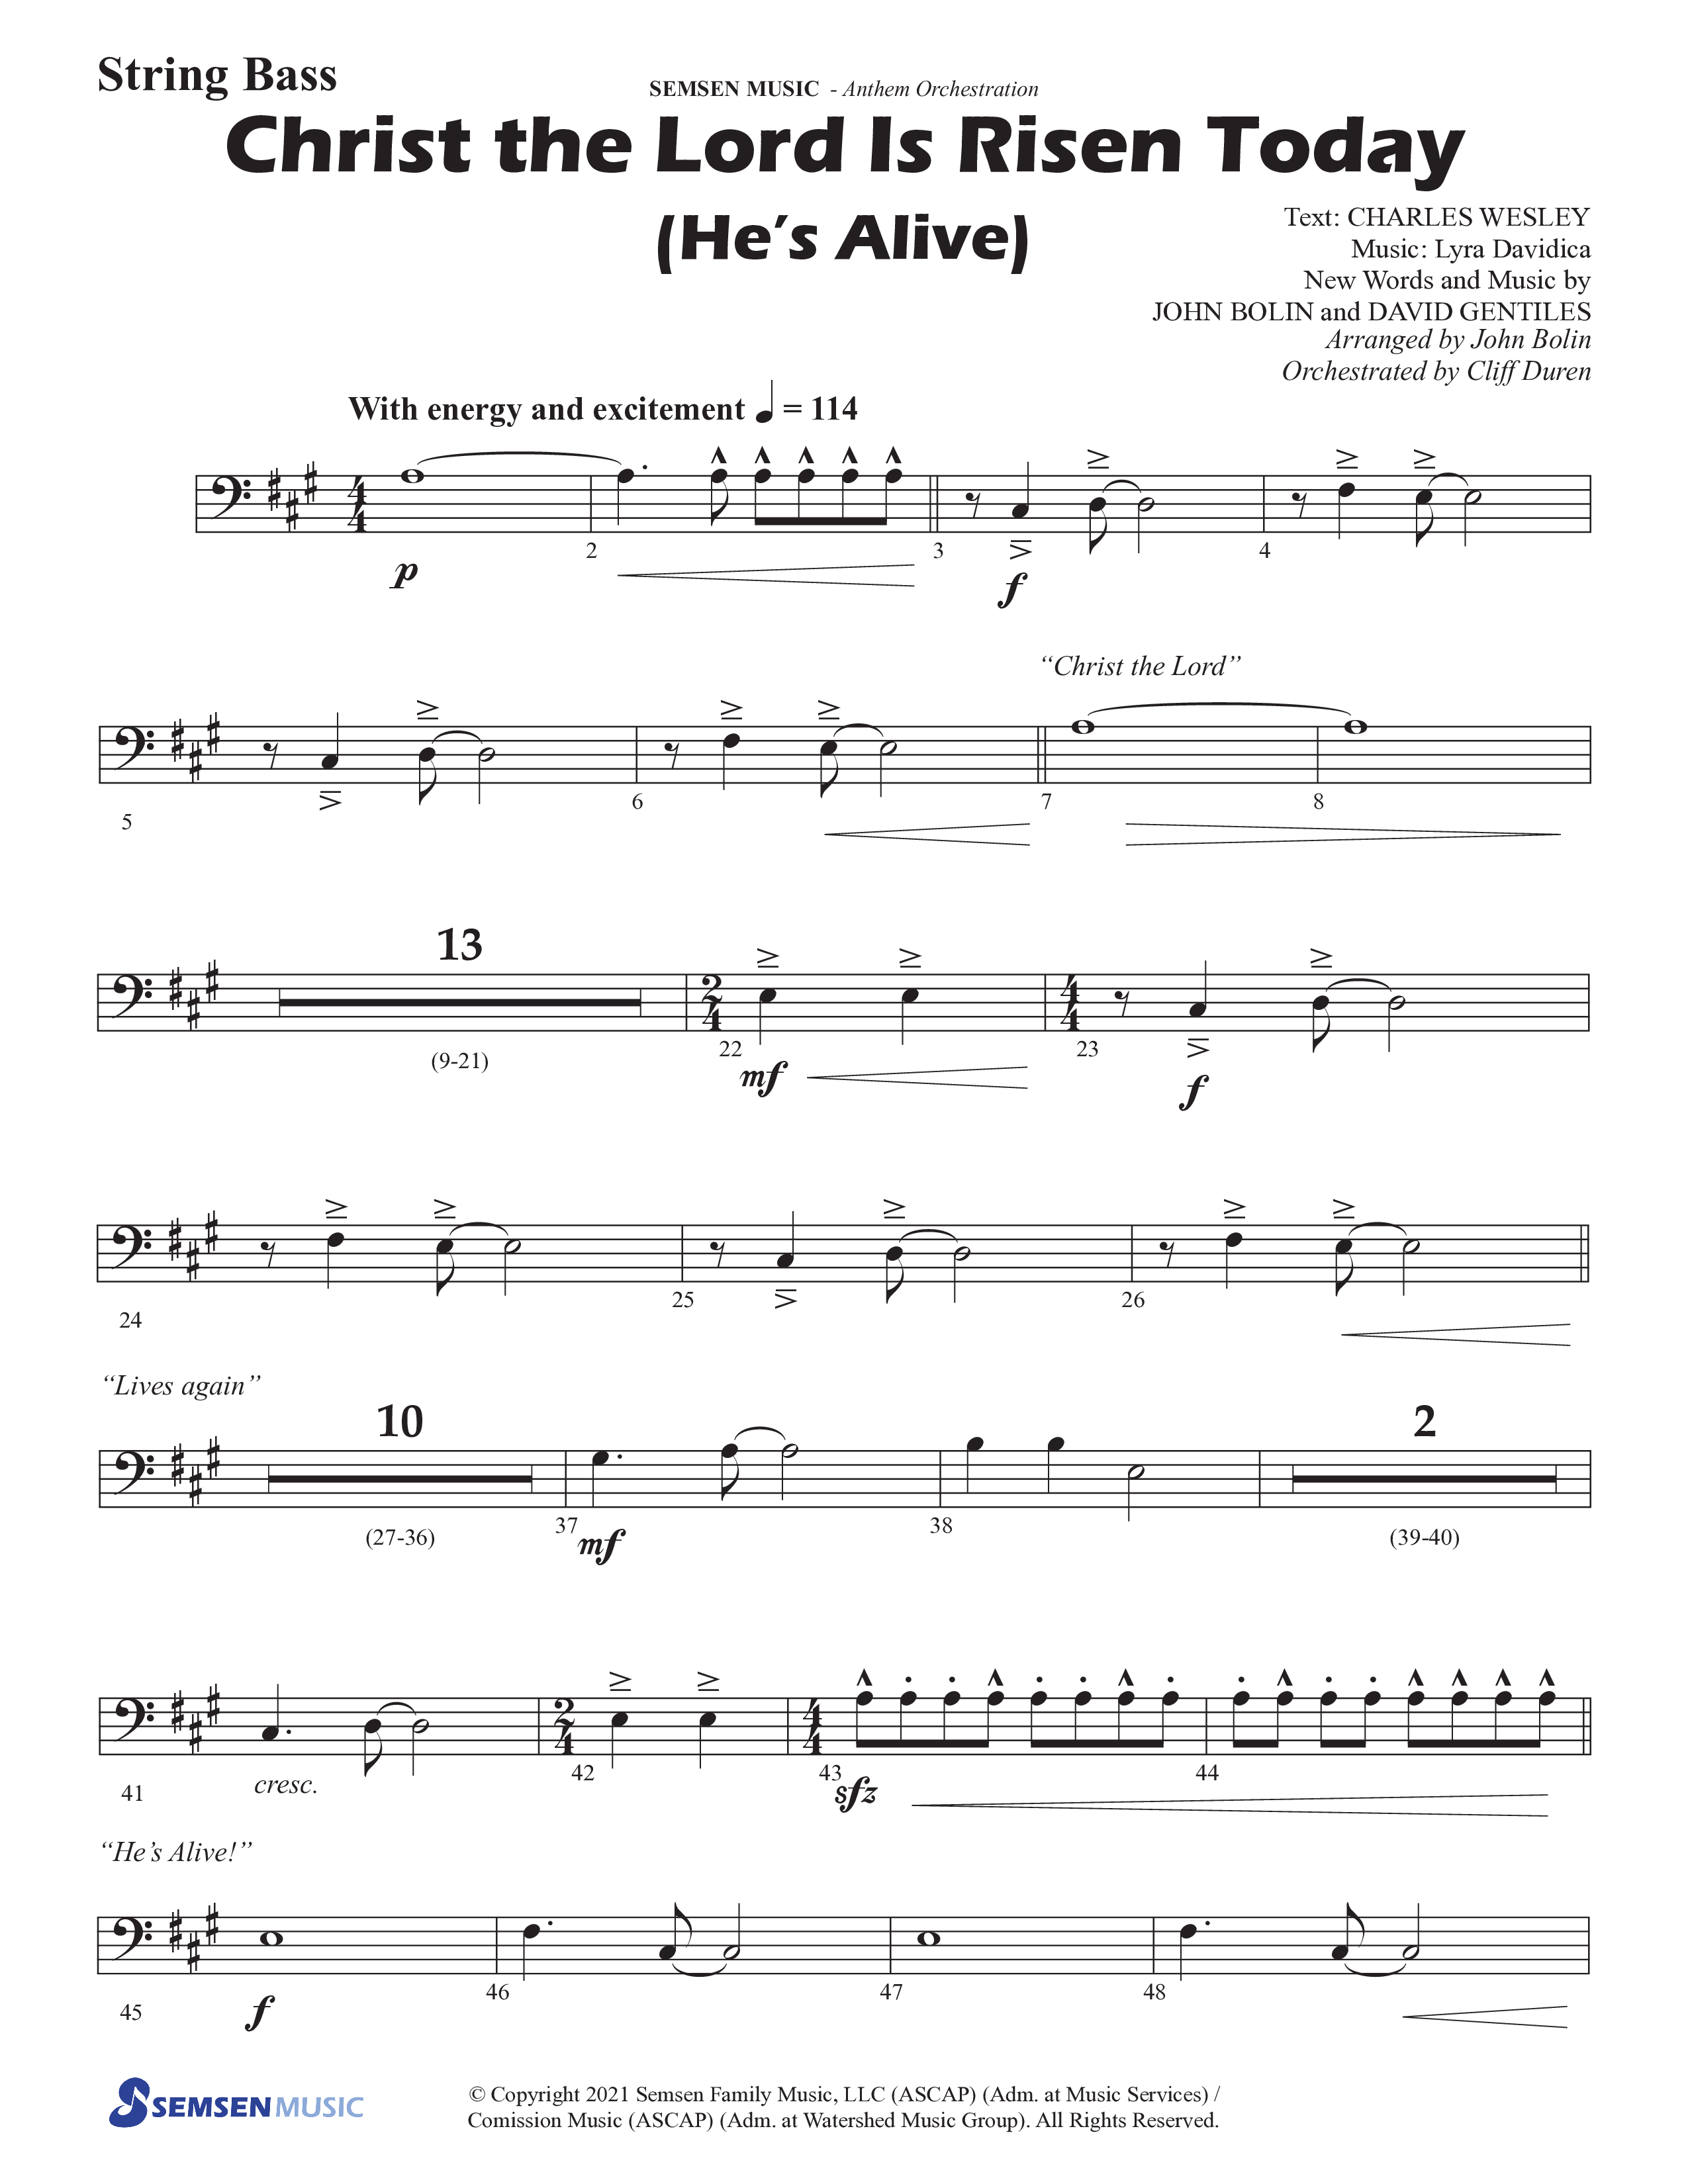 Christ The Lord Is Risen Today (He's Alive) (Choral Anthem SATB) String Bass (Semsen Music / Arr. John Bolin / Orch. Cliff Duren)